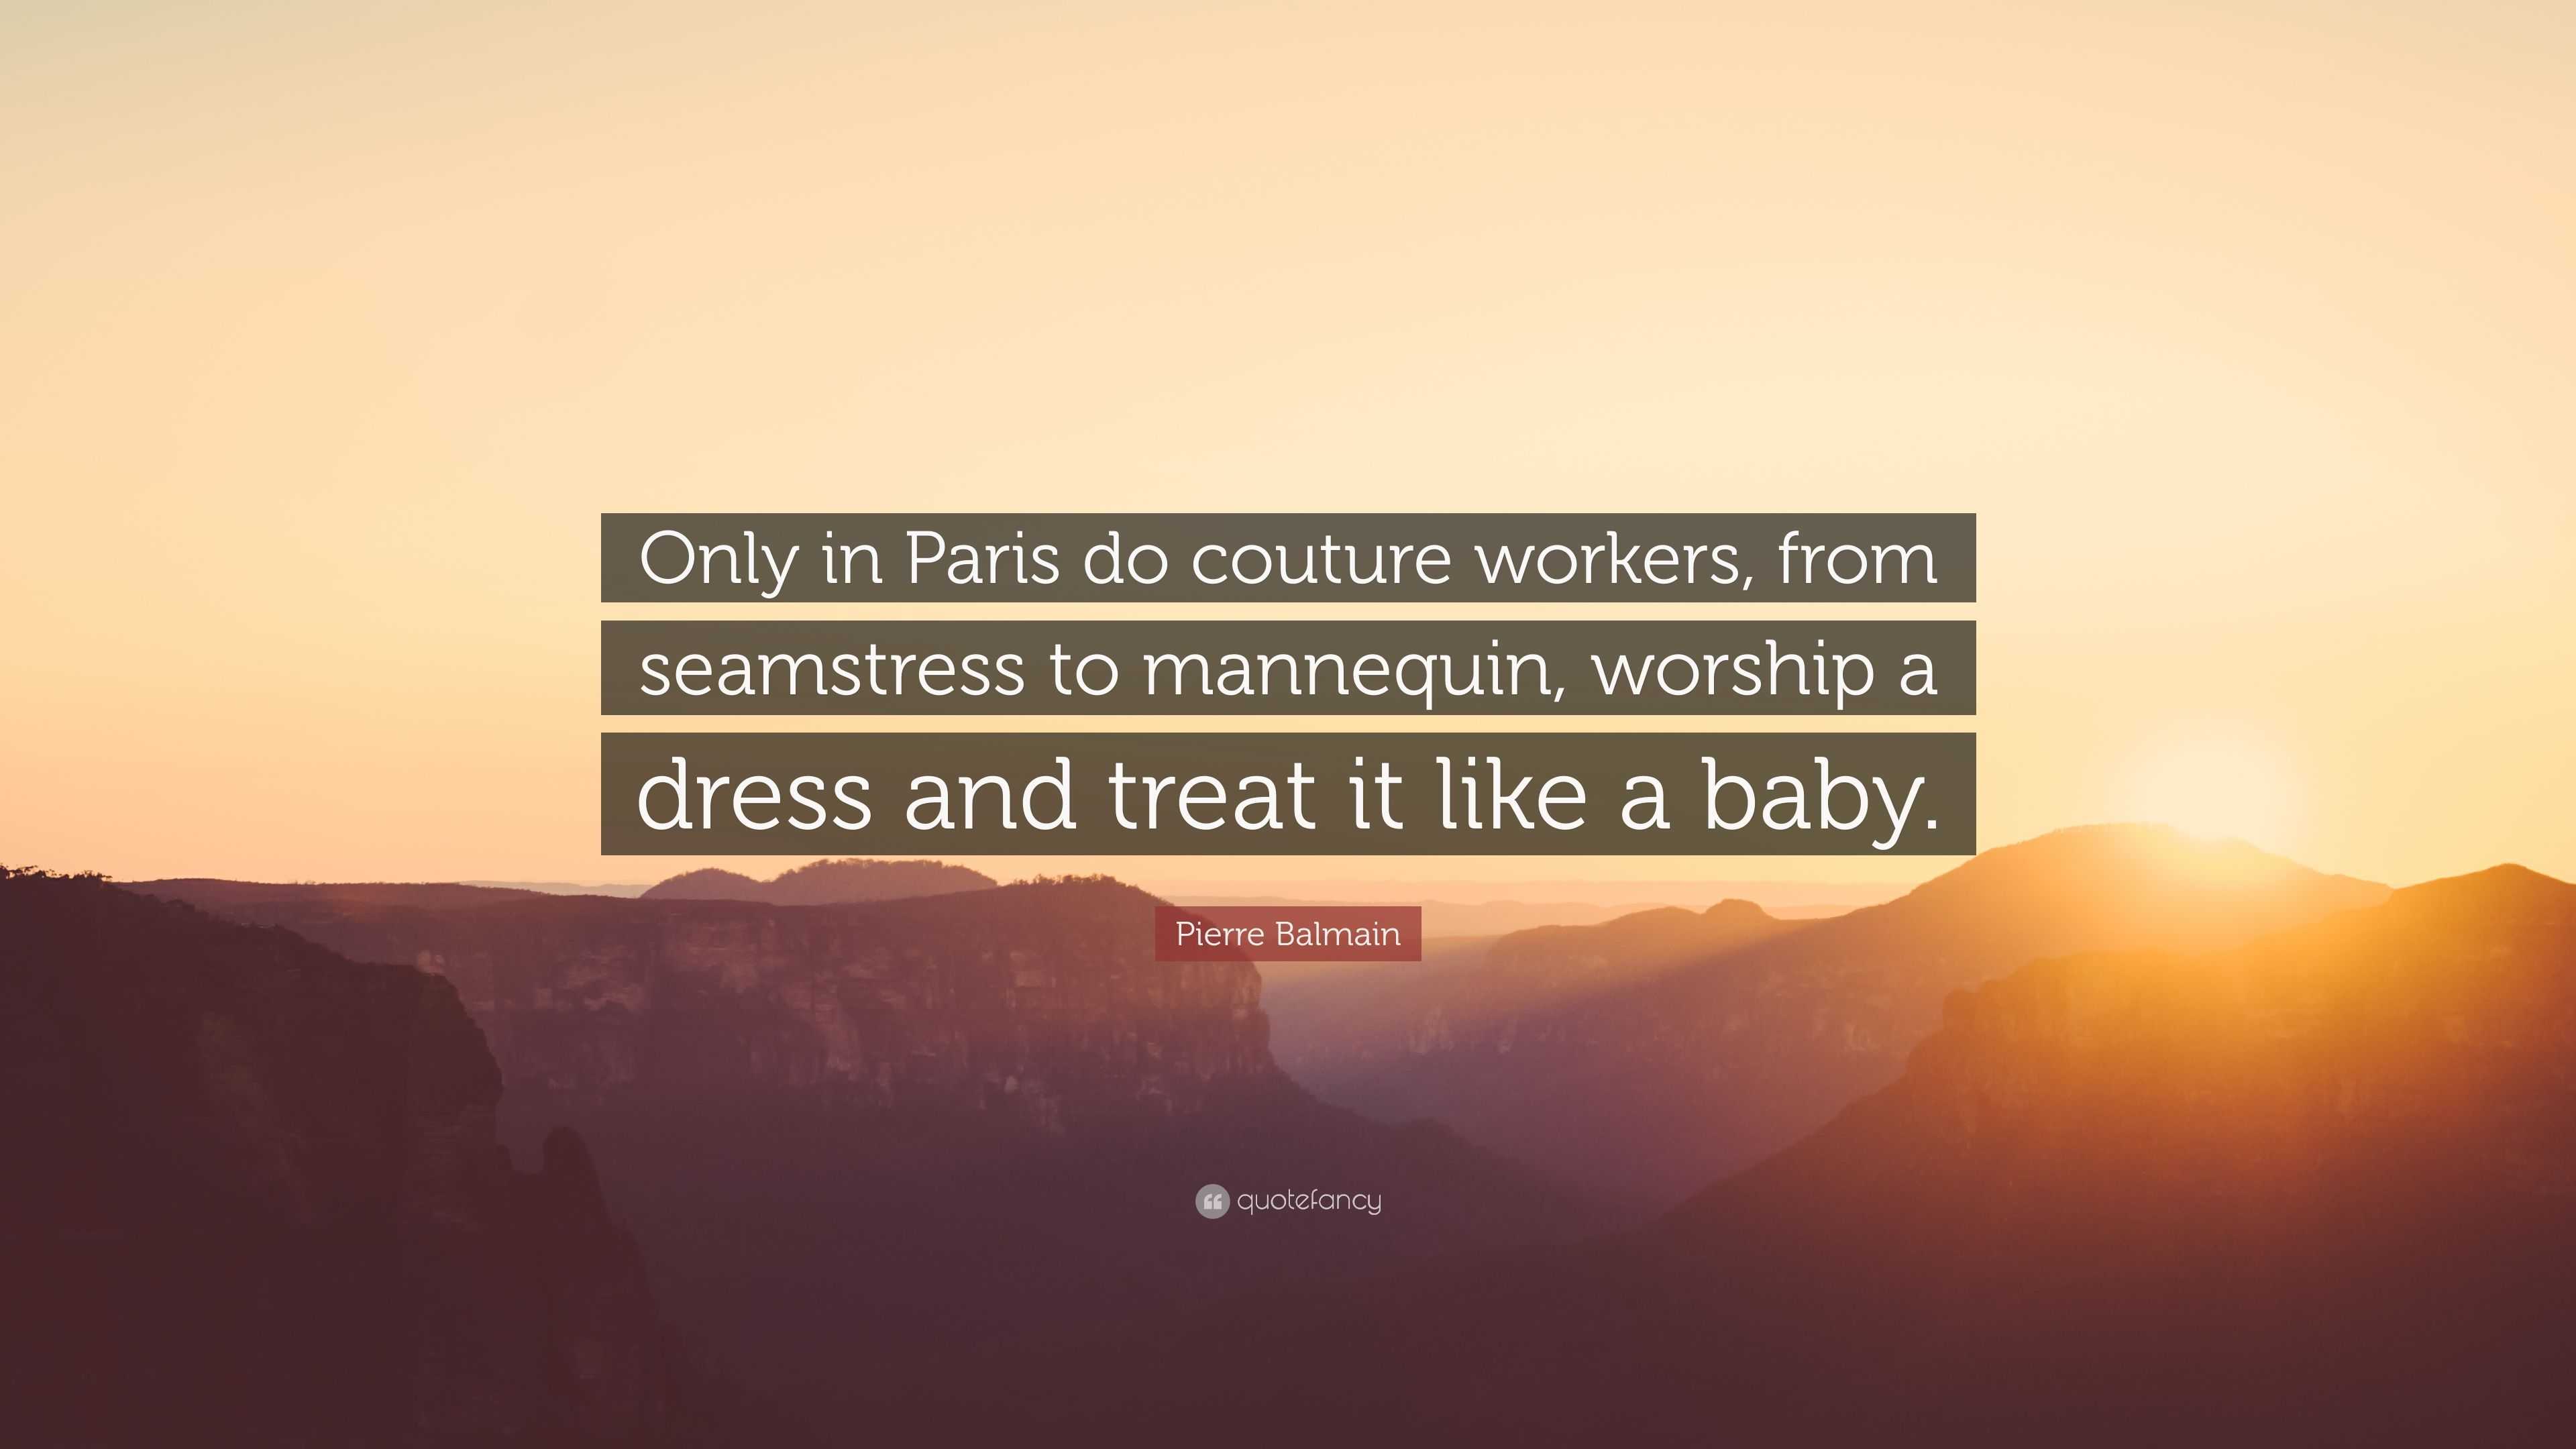 Pierre Balmain “Only in Paris do couture workers, from seamstress to mannequin, worship a dress